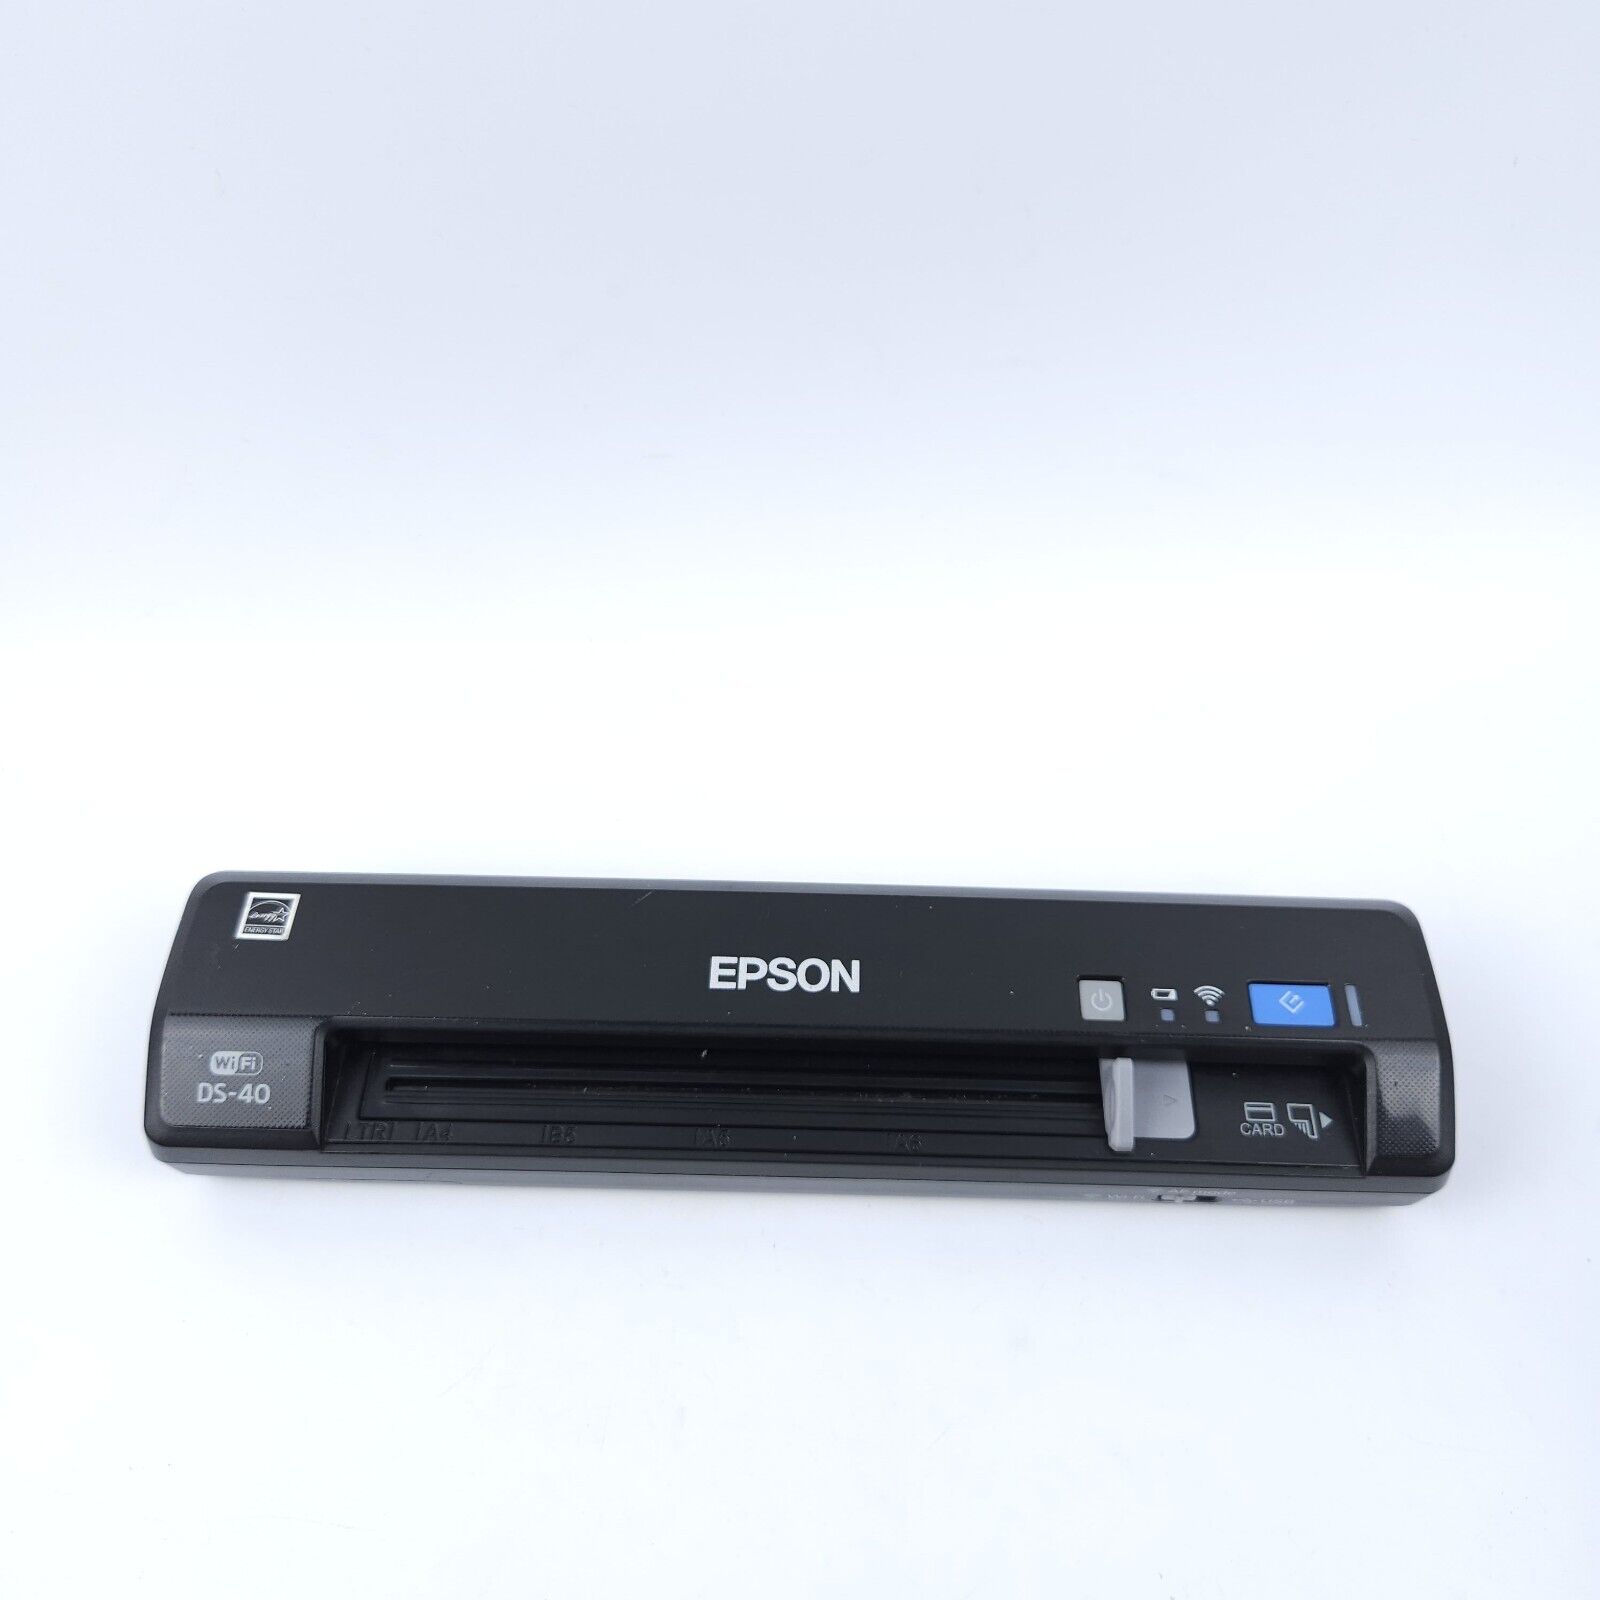 Epson WorkForce DS-40 Wireless Portable Document Scanner Tested No Cables 